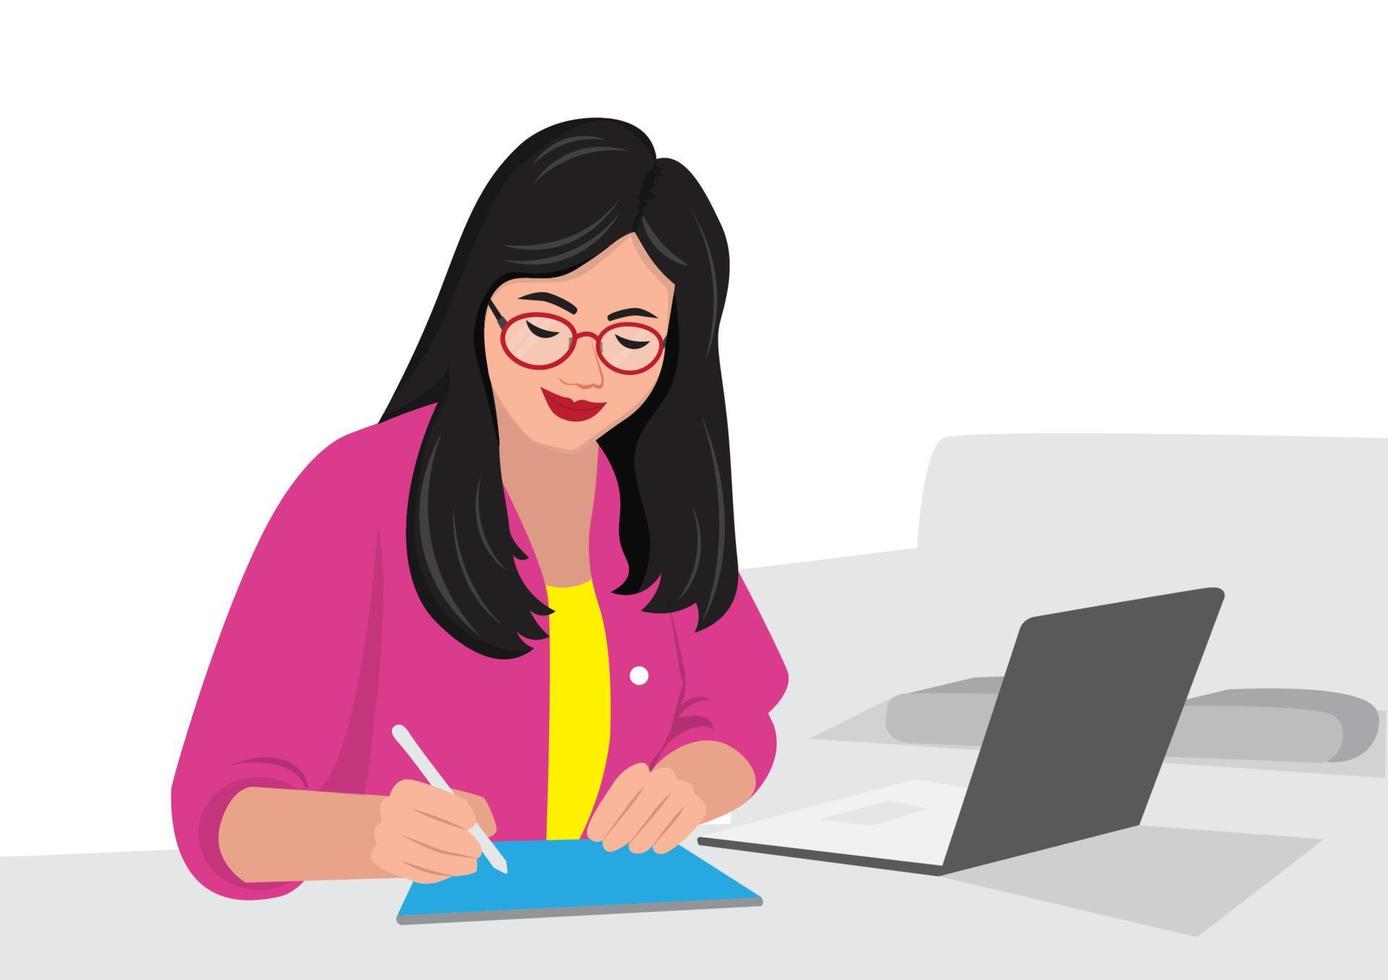 Vector illustration of a confident, stylish woman running a business using a laptop.